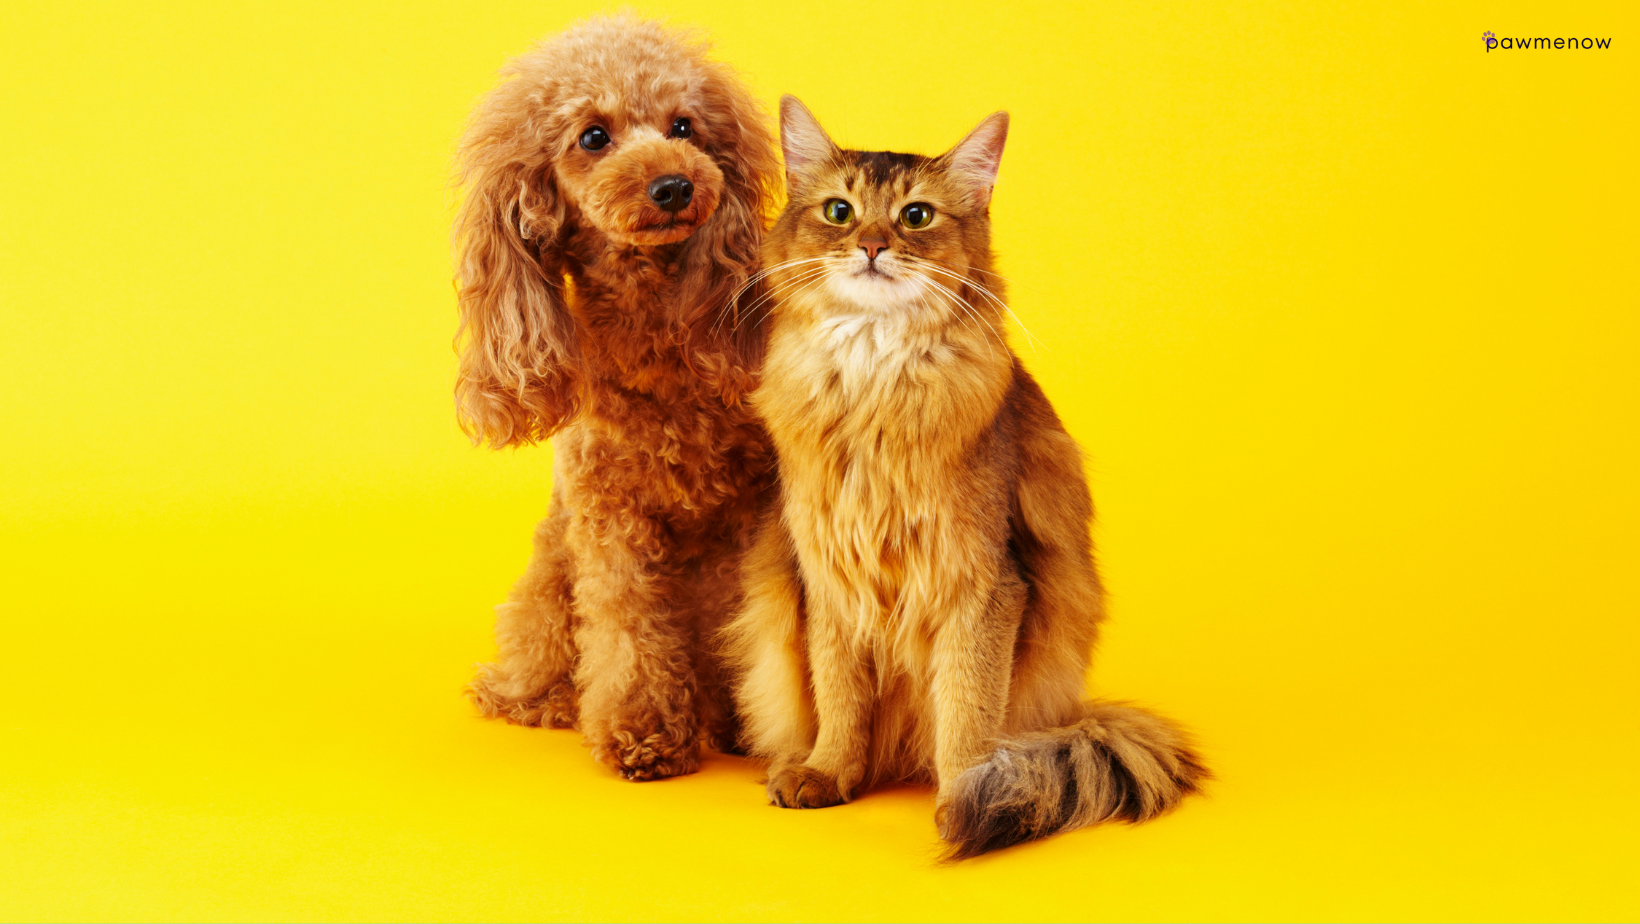 How to introduce a Poodle to a cat